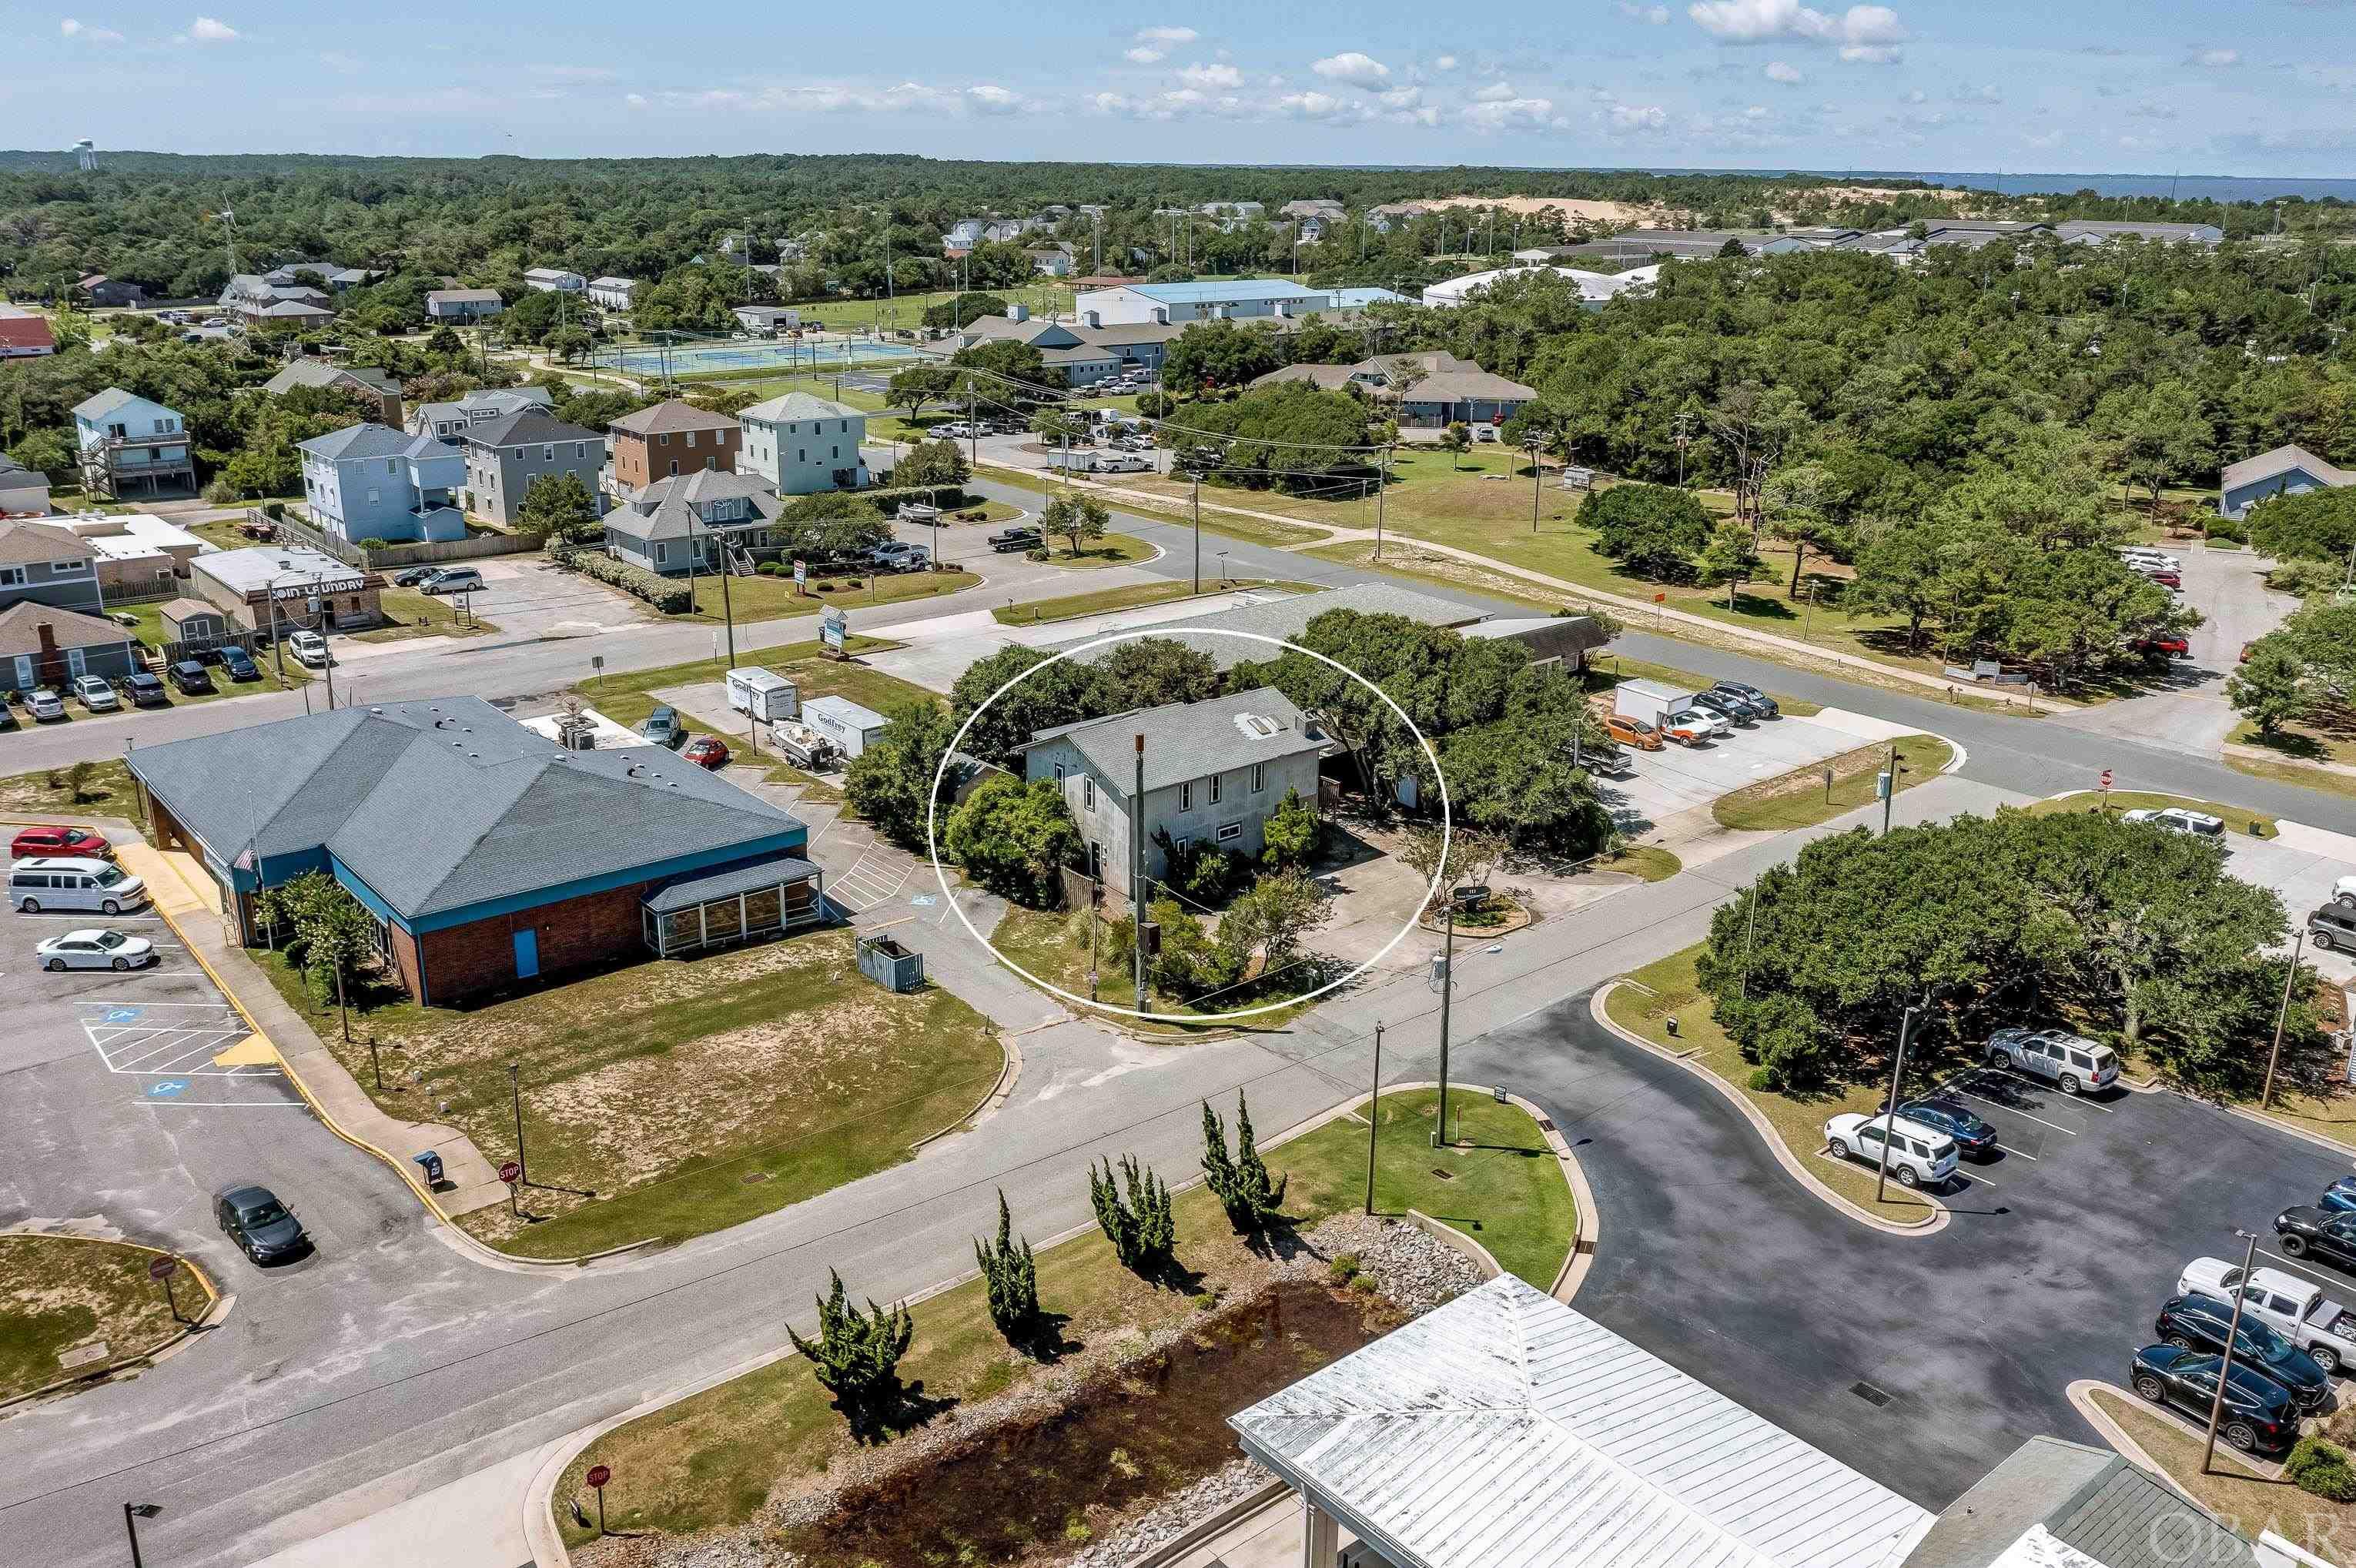 Opportunity strikes with this super rare find of a mixed use Commercial and Residential building located in the heart of Kill Devil Hills. With 2,351 heated square feet and multiple options this one has a little bit of all the essentials. The top level offers its own entry with Three bedrooms, Two updated bathrooms, Living Room with a Contemporary style Gas fire place and Large Kitchen with a quality gas stove and range. Quality new tile plank flooring throughout the living and bathroom areas. Large deep skylights offer natural light while a glass block wall accentuates it all and creates a great ambience in the living spaces. An interior stairwell leads to the ground level which also offers two separate entry's and exits on the western and eastern sides, perfect for your business needs. This level is a commercial office space with multiple rooms including a large Kitchenette, Half bath and a utility room with washer, dryer and HW heater. This is truly a great chance to create your vison with a little TLC and some savvy creativity this will be a homerun and offers a variety of uses. Live and work on site as an Owner operator, rent the top floor and work out of the lower levels, Rent both floors for positive cash flow, Airbnb, Long Term housing, Student rentals or use entire building as your own….lots of great options. The Exterior yard space has plenty of green space, live oaks and locally sourced vegetation creating great curb appeal for an attractive business space. With a large detached workshop with power this property has even more potential and no lack of storage options. Centrally located and within quick walk or biking distances to Parks n Rec for some exercise, Brew Station for food and drink, Post Office for your partners Amazon returns, KDH multi use path to skate parks and ball fields and of course a stop light 2 blocks away with a fantastic beach access with showers and baths. Call me to discuss the possibilities.